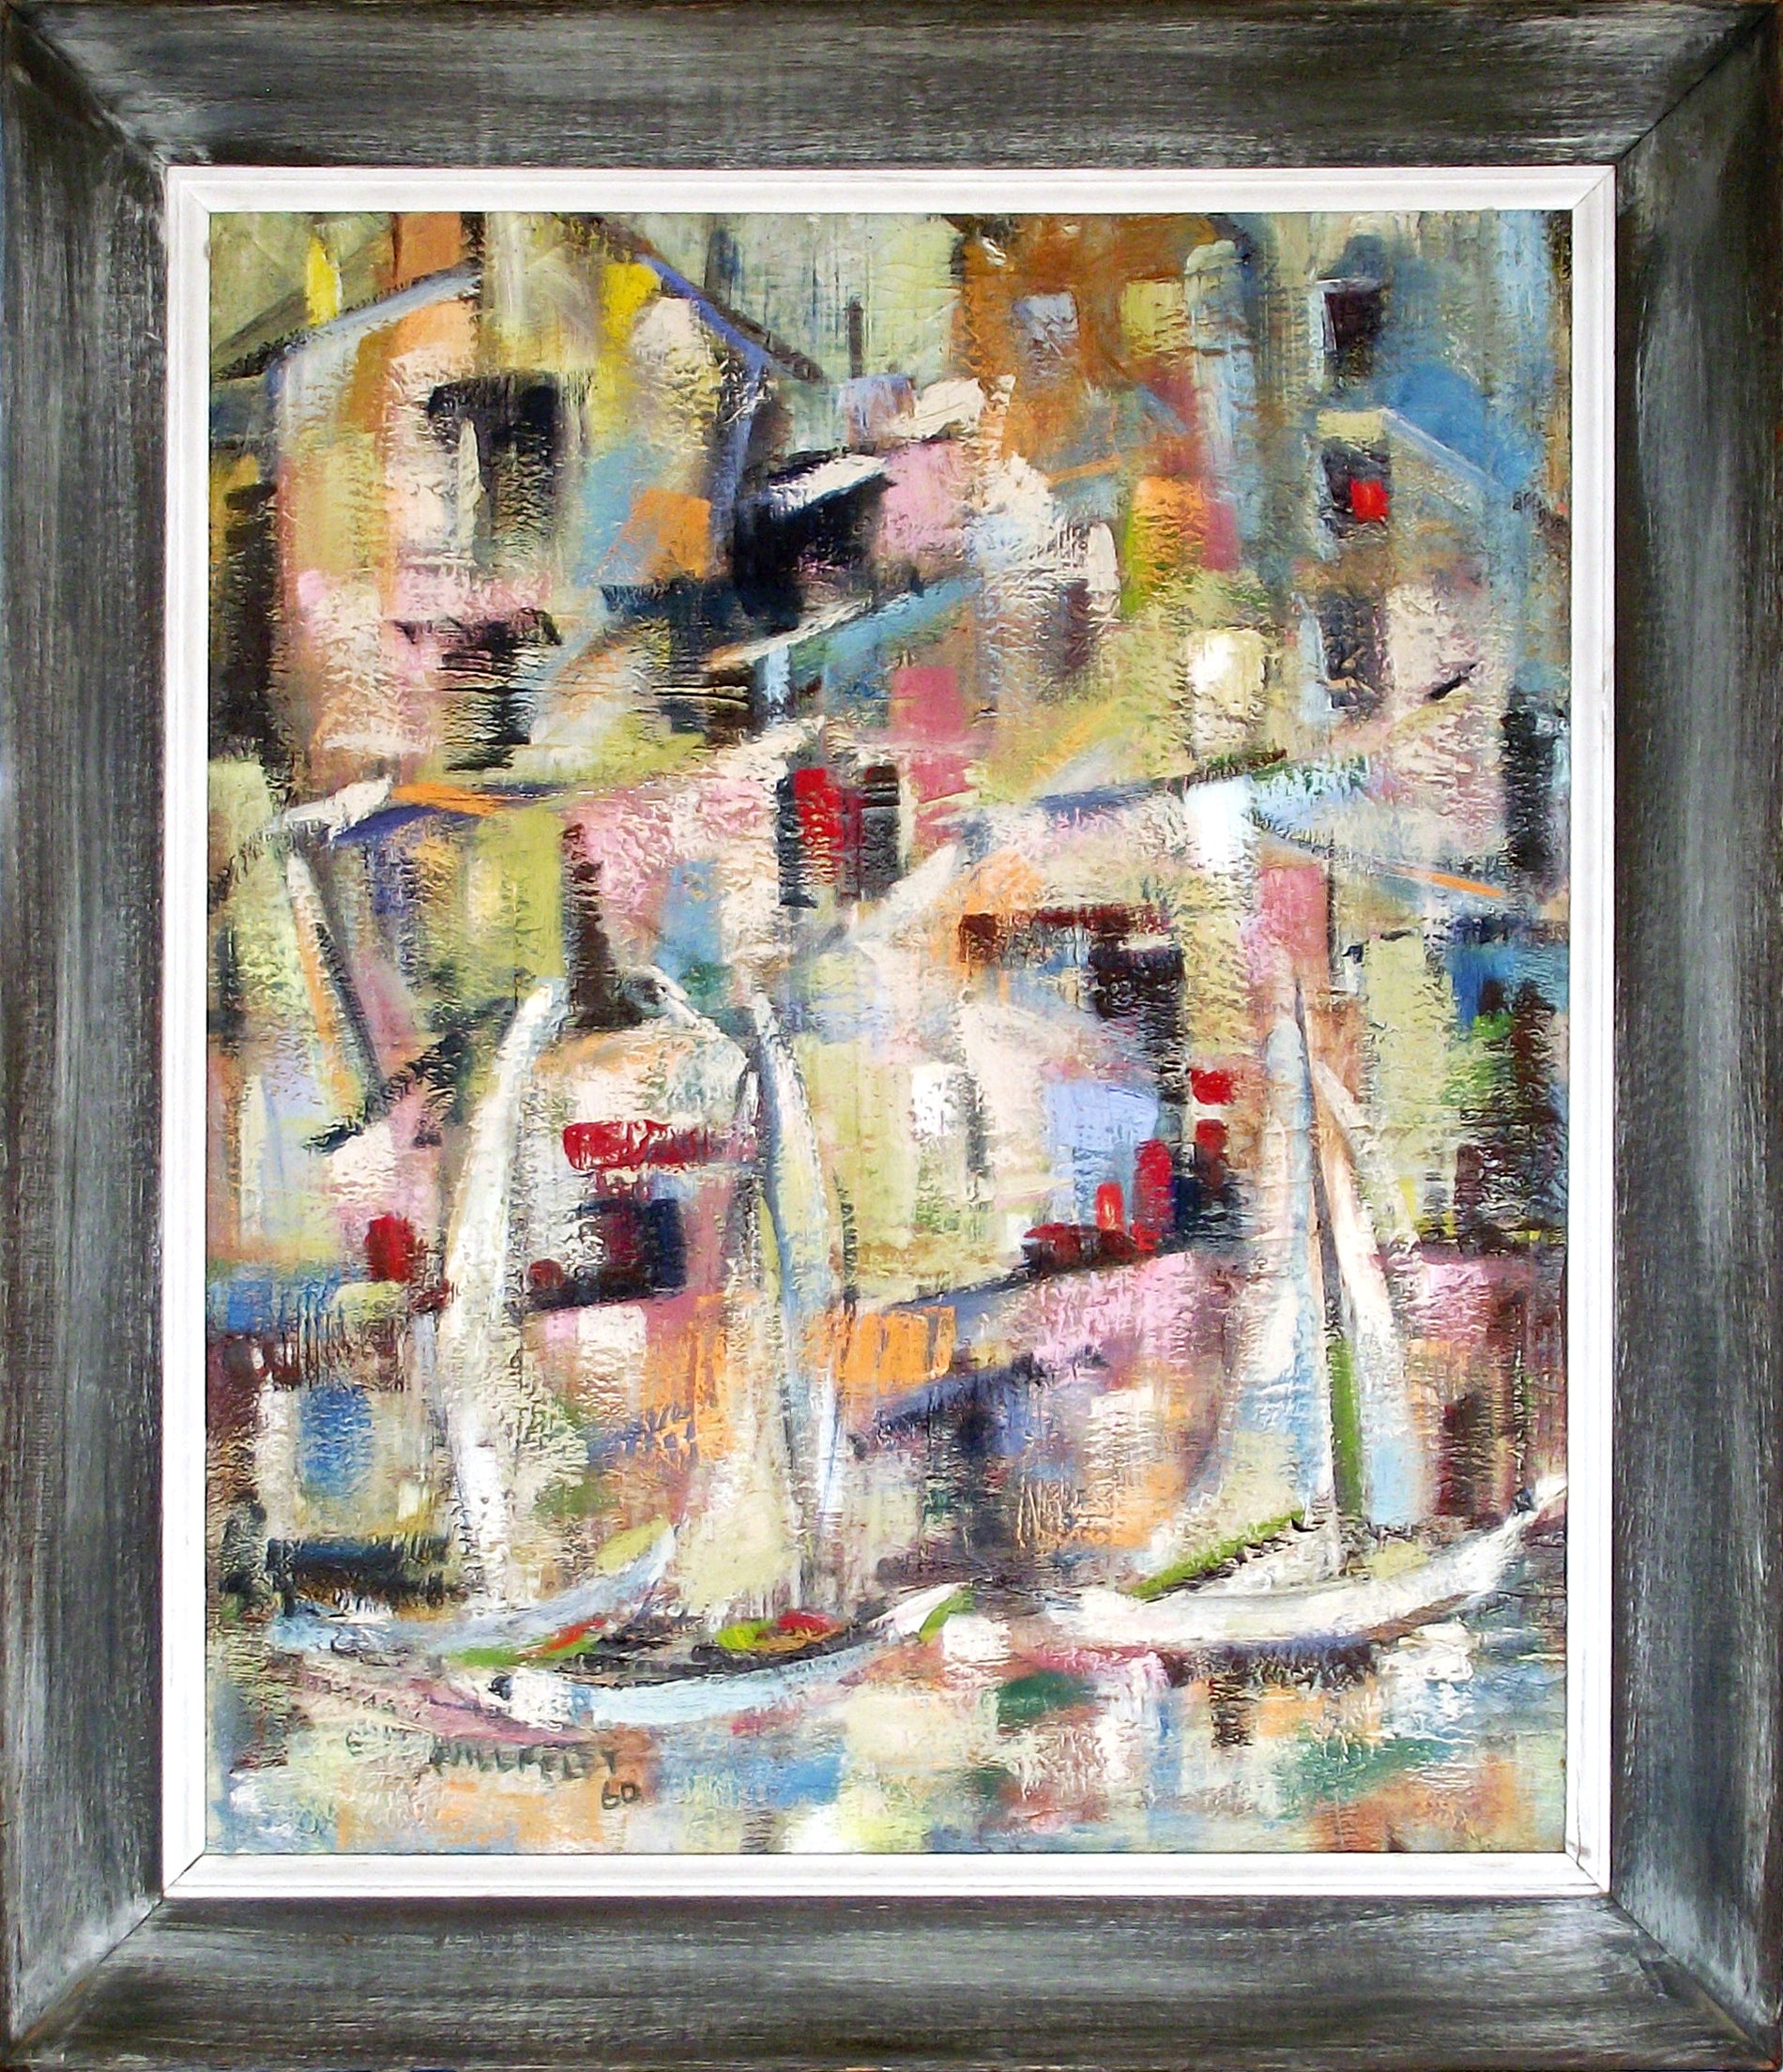 1960 Maritime Scene, Abstract Oil Painting, Signed